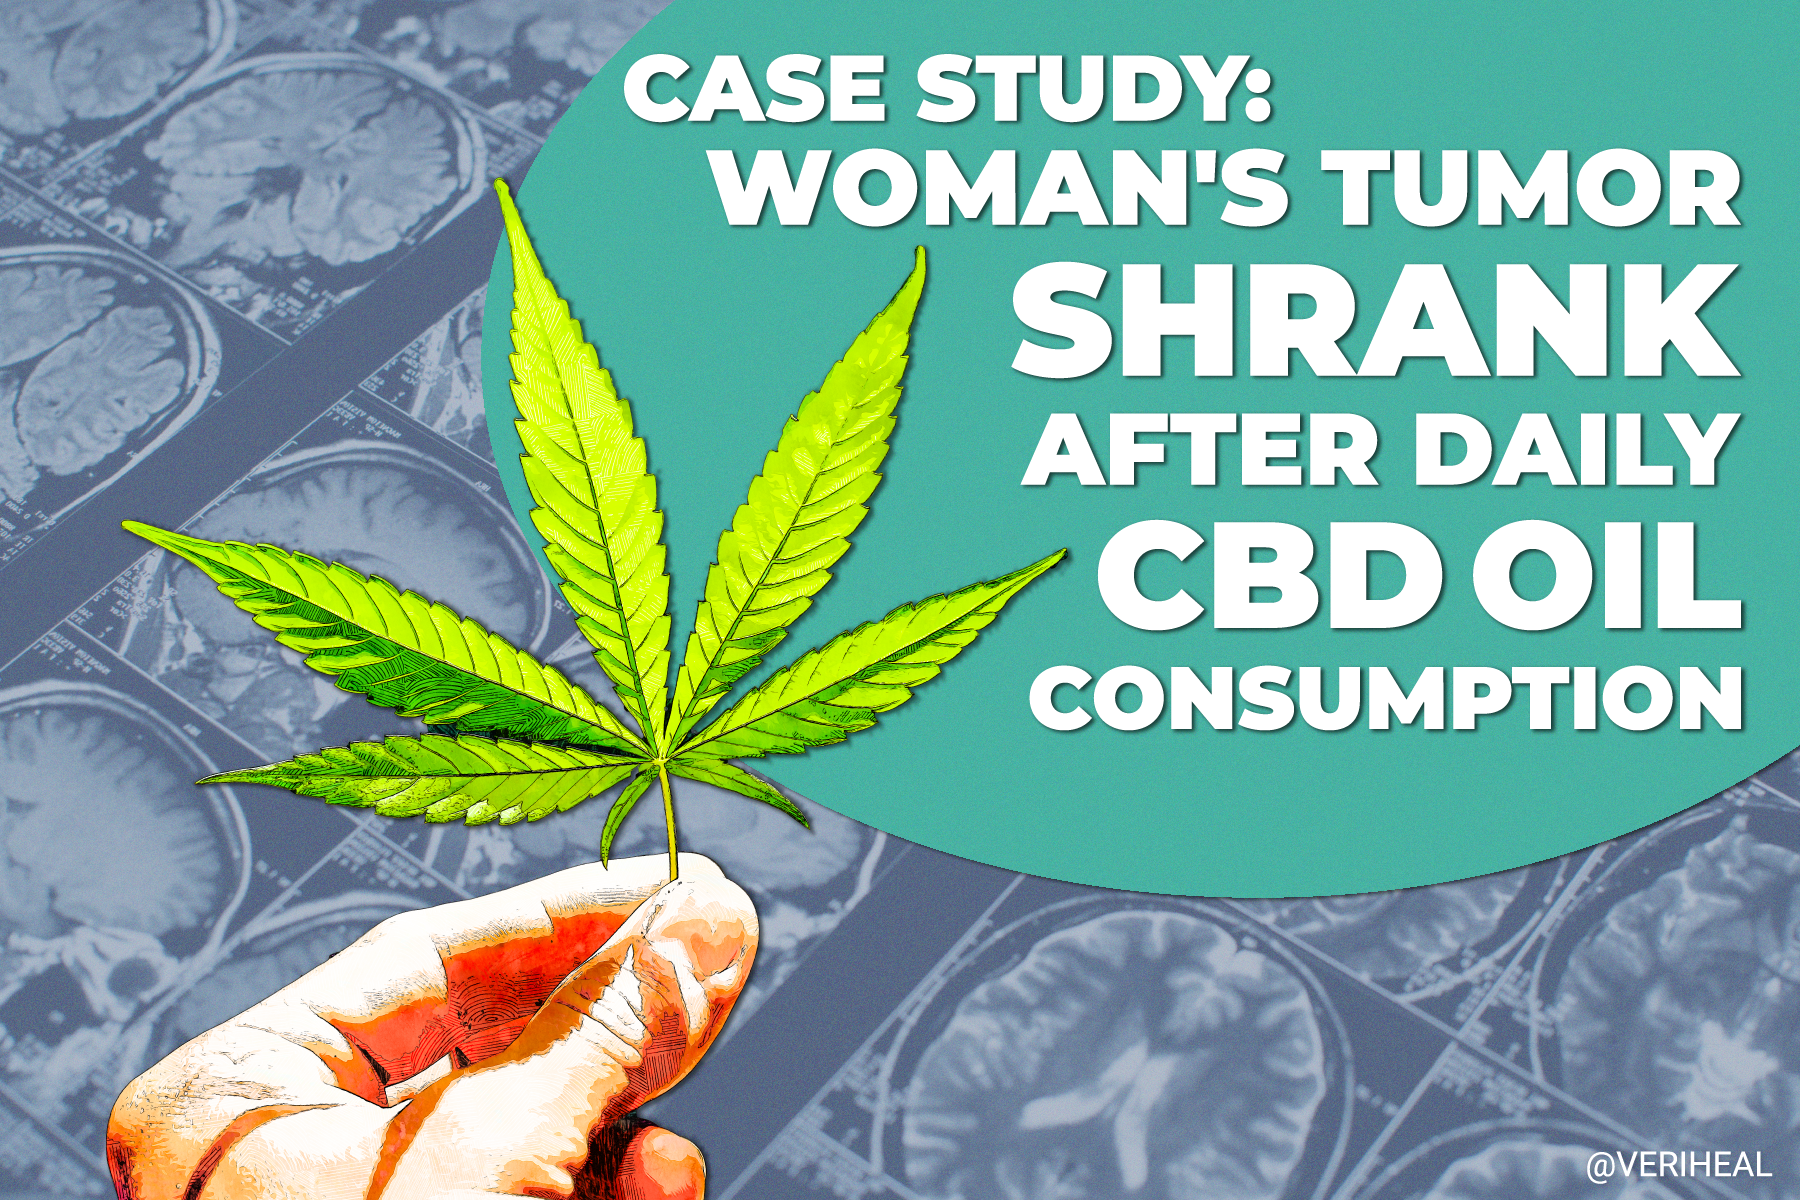 Case Study: Woman’s Tumor Shrank After Daily CBD Oil Consumption Over 2+ Years